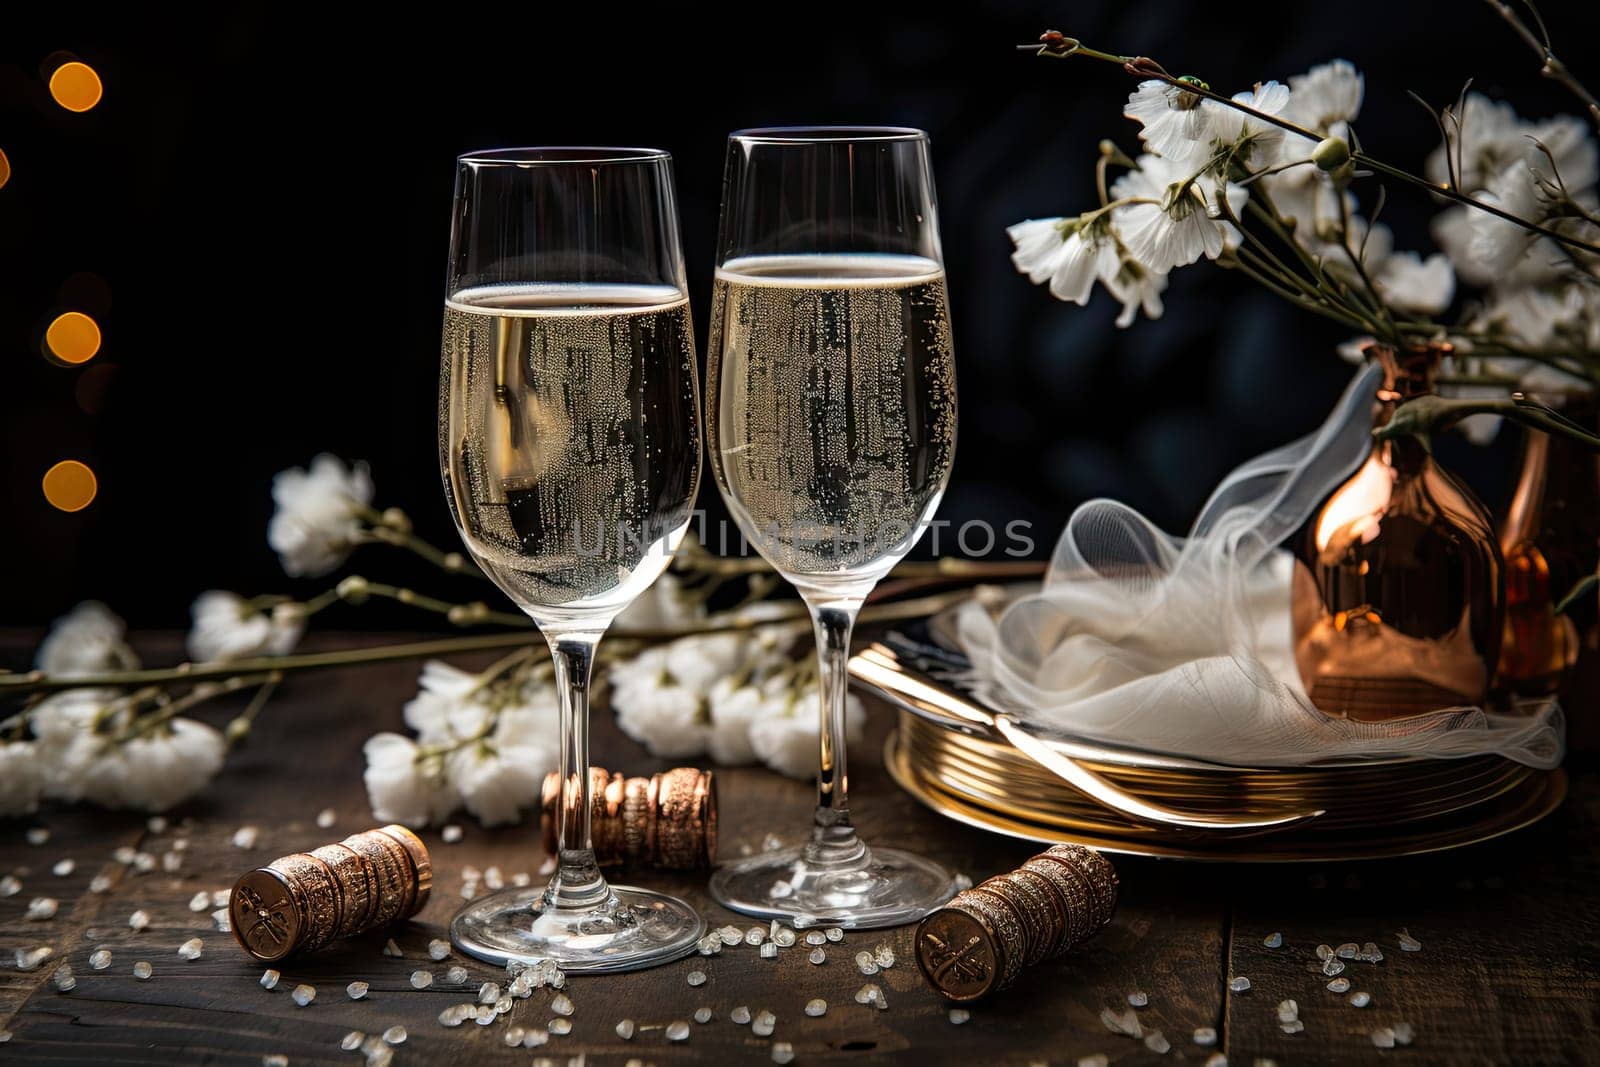 A Toast to Celebration: Two Gleaming Champagne Glasses Reflecting the Brilliance of a Wine Bottle